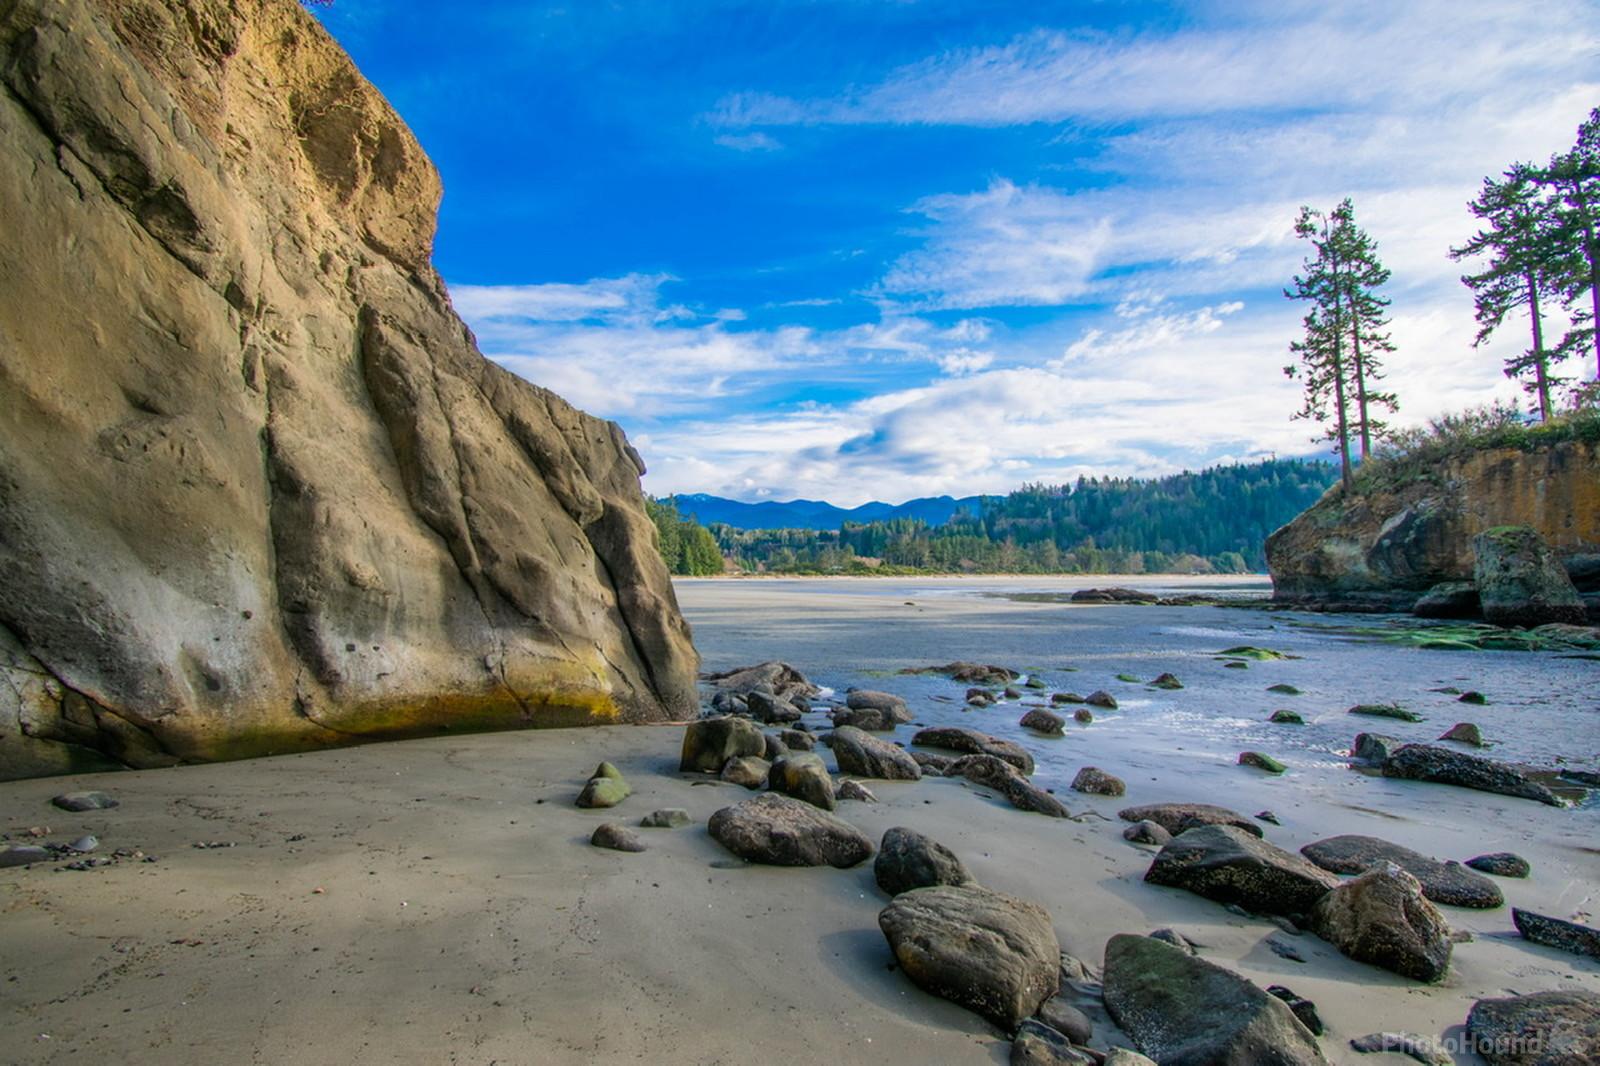 Image of Salt Creek Recreation Area by Ray Graves